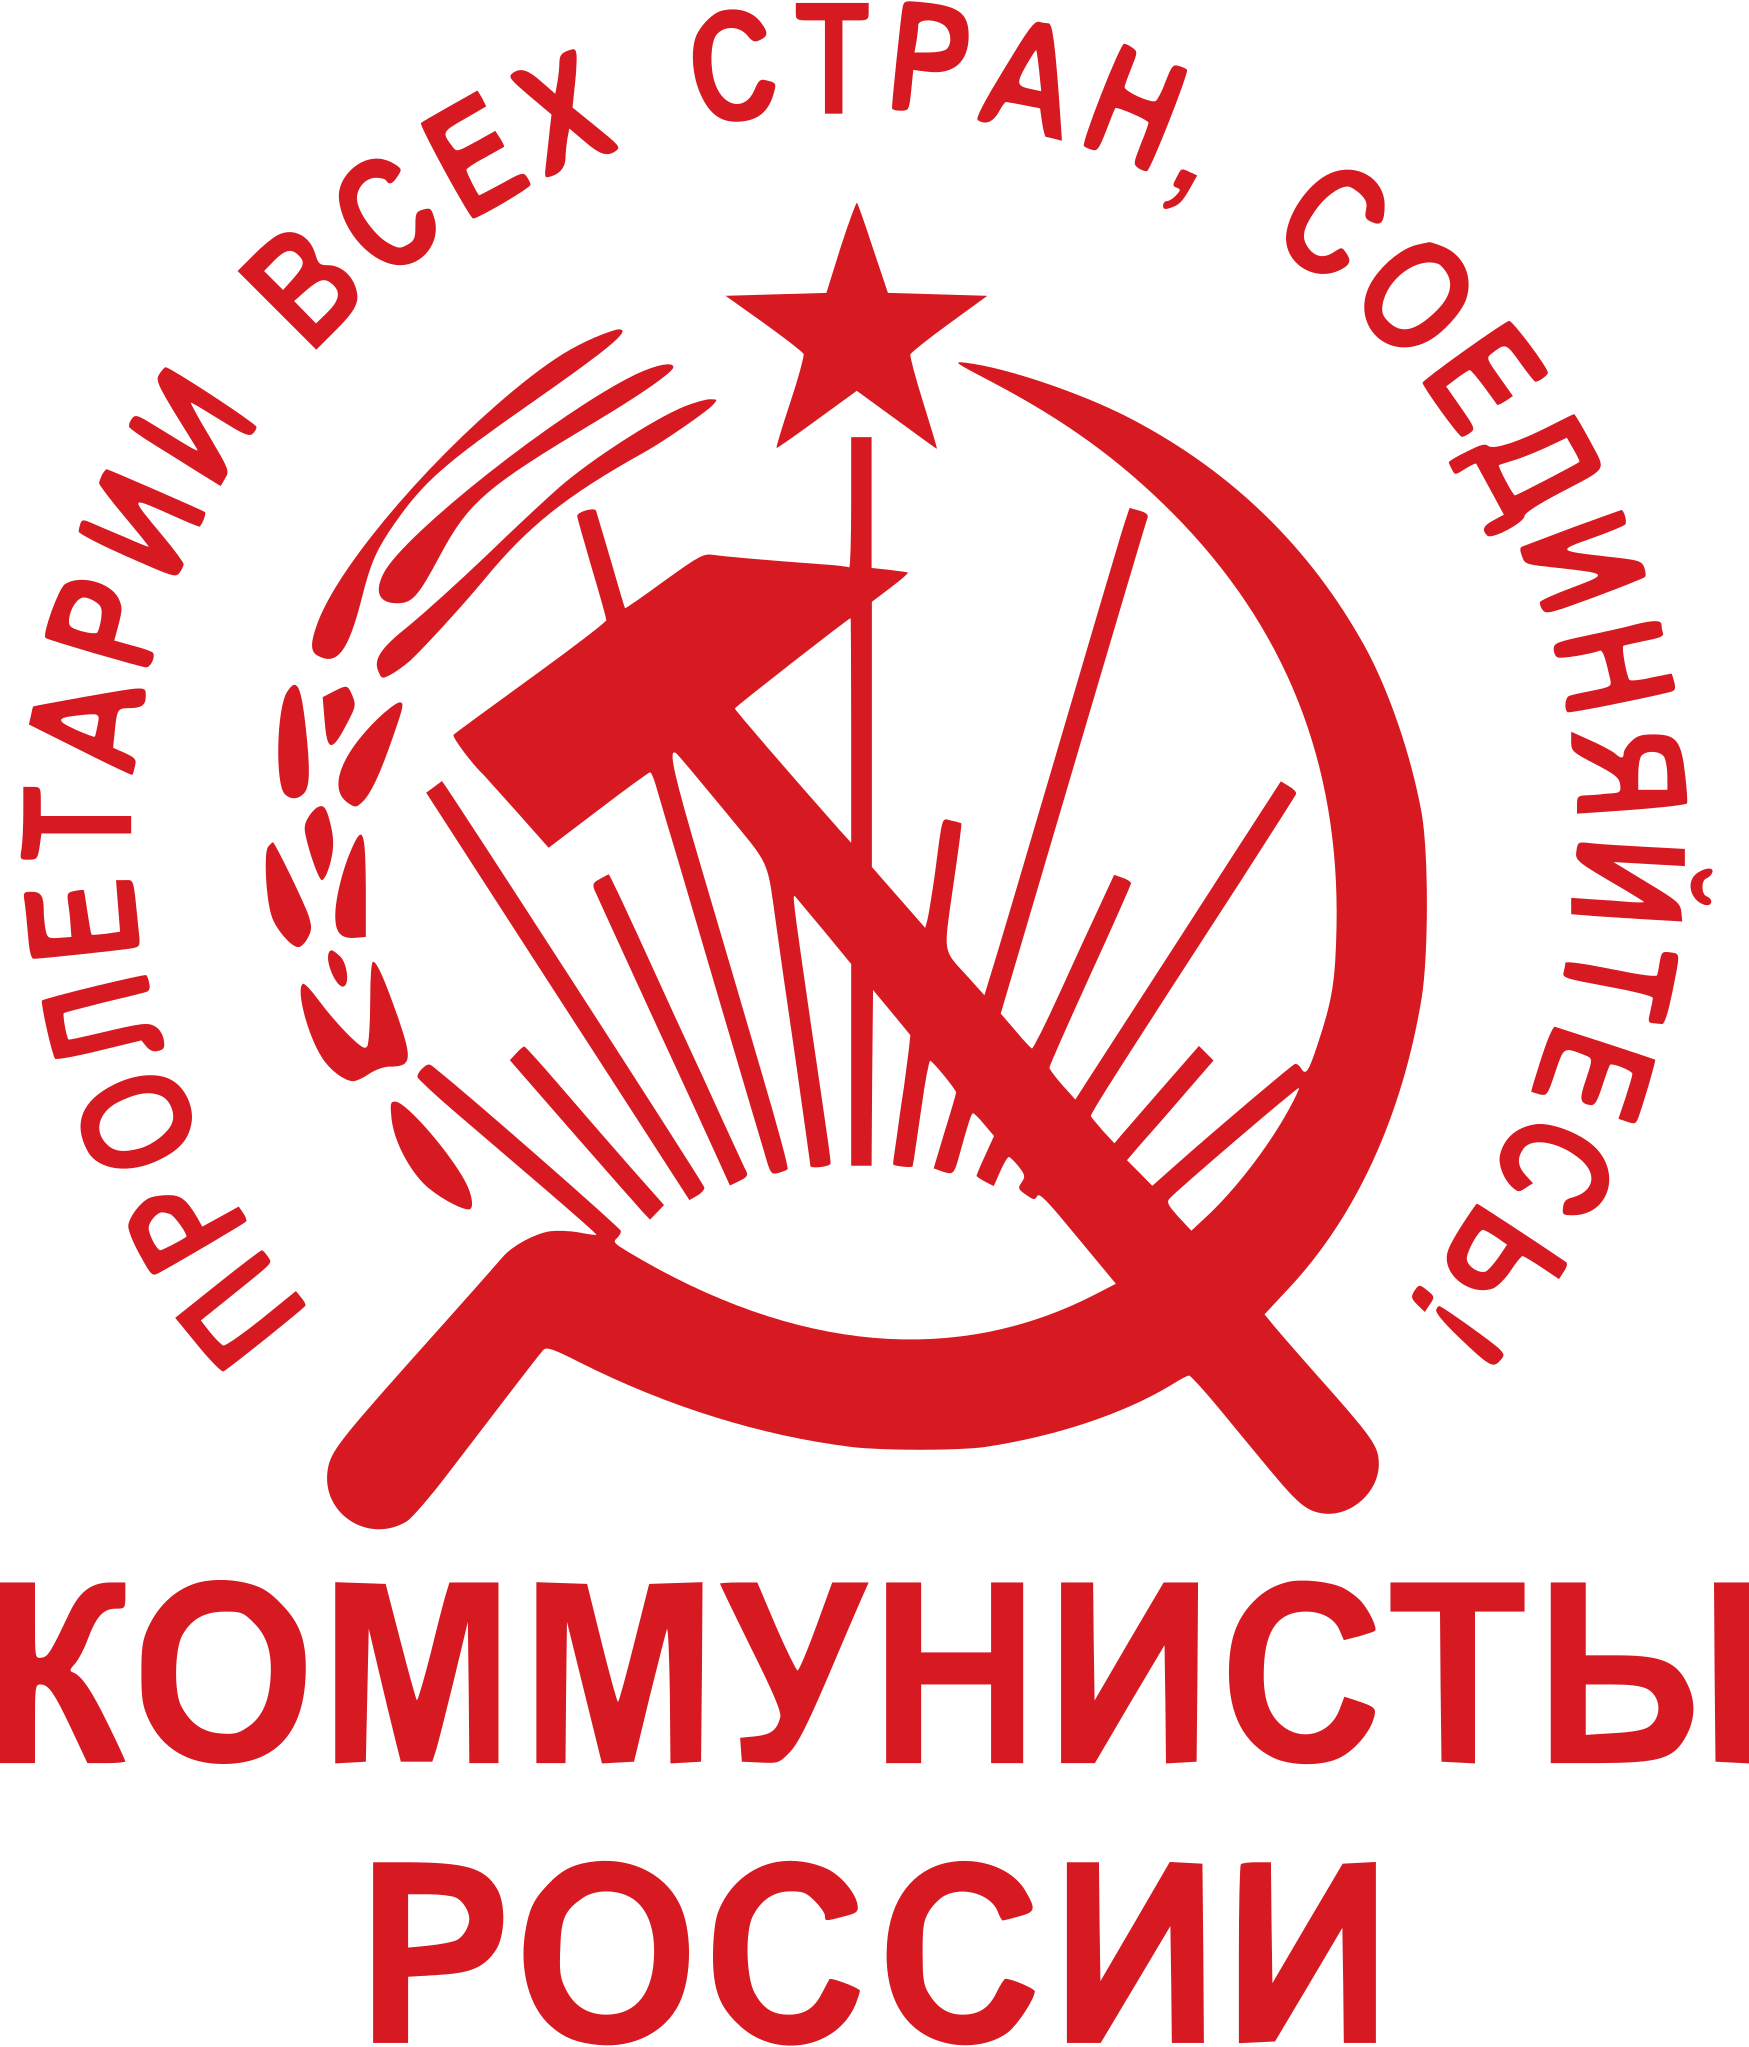 File:Communists of Russia.png